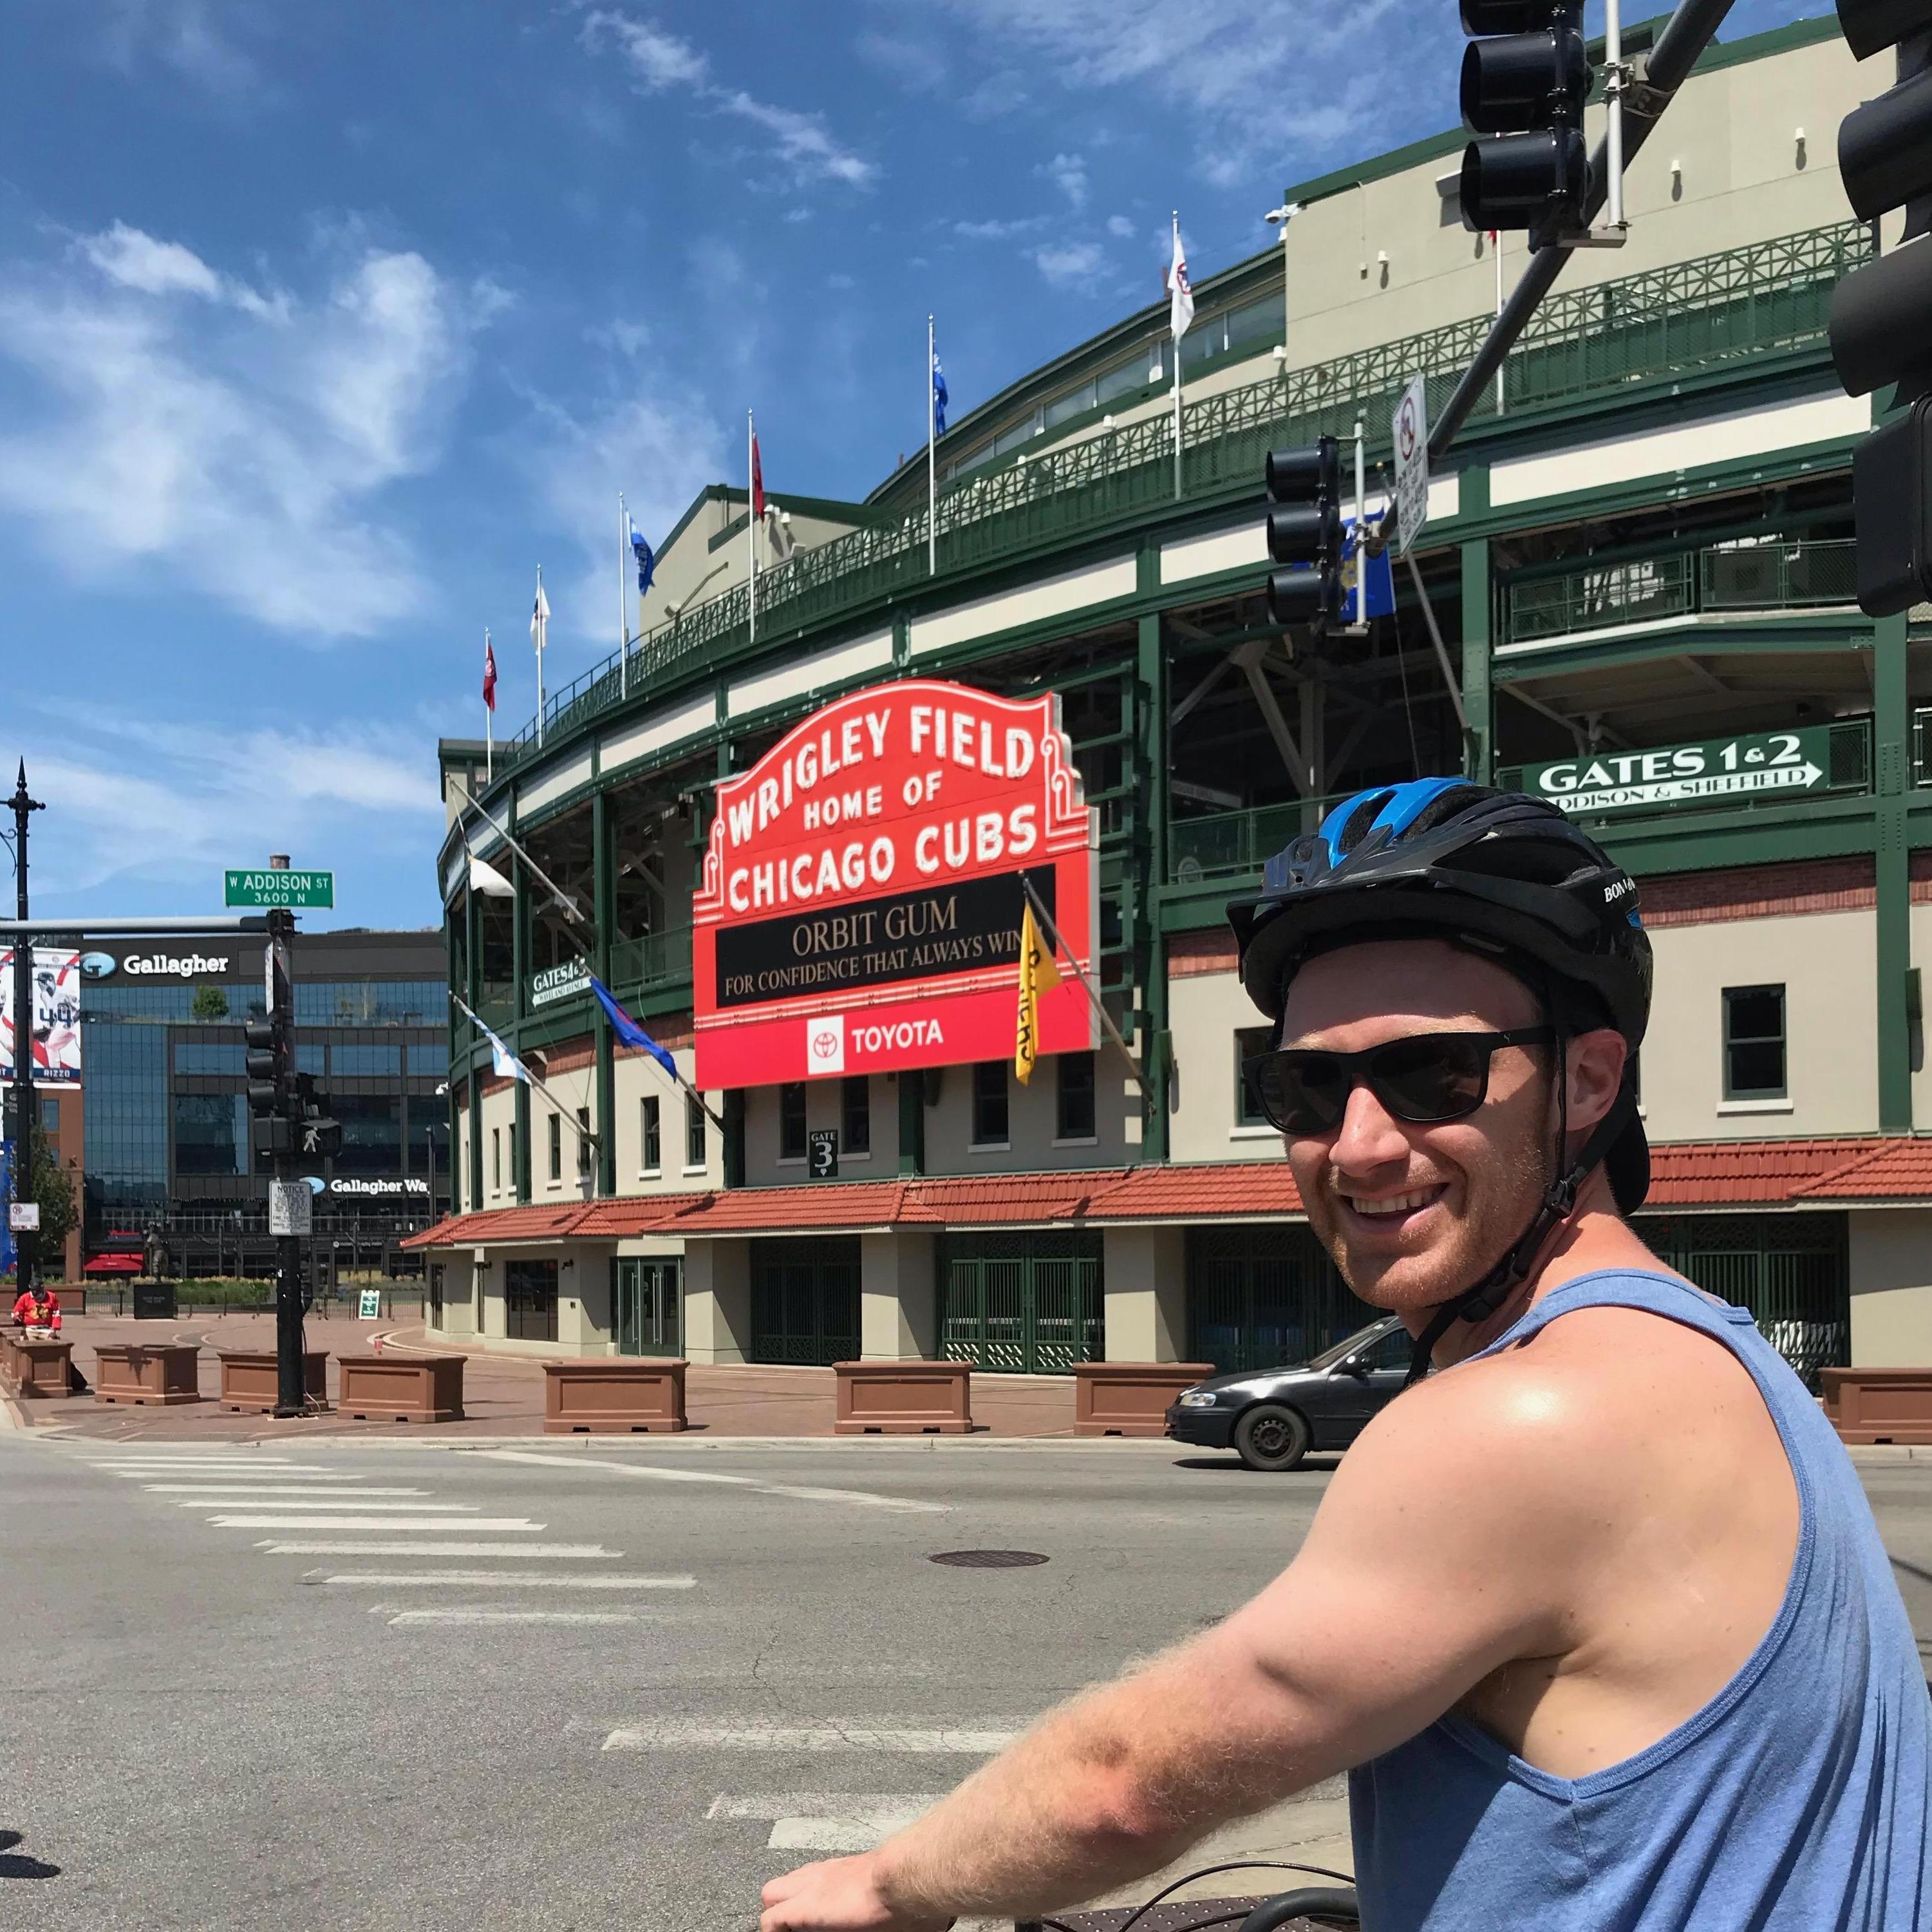 Wrigley Field in Chicago! Ben made us bike through traffic to get there, but it's cool I guess.